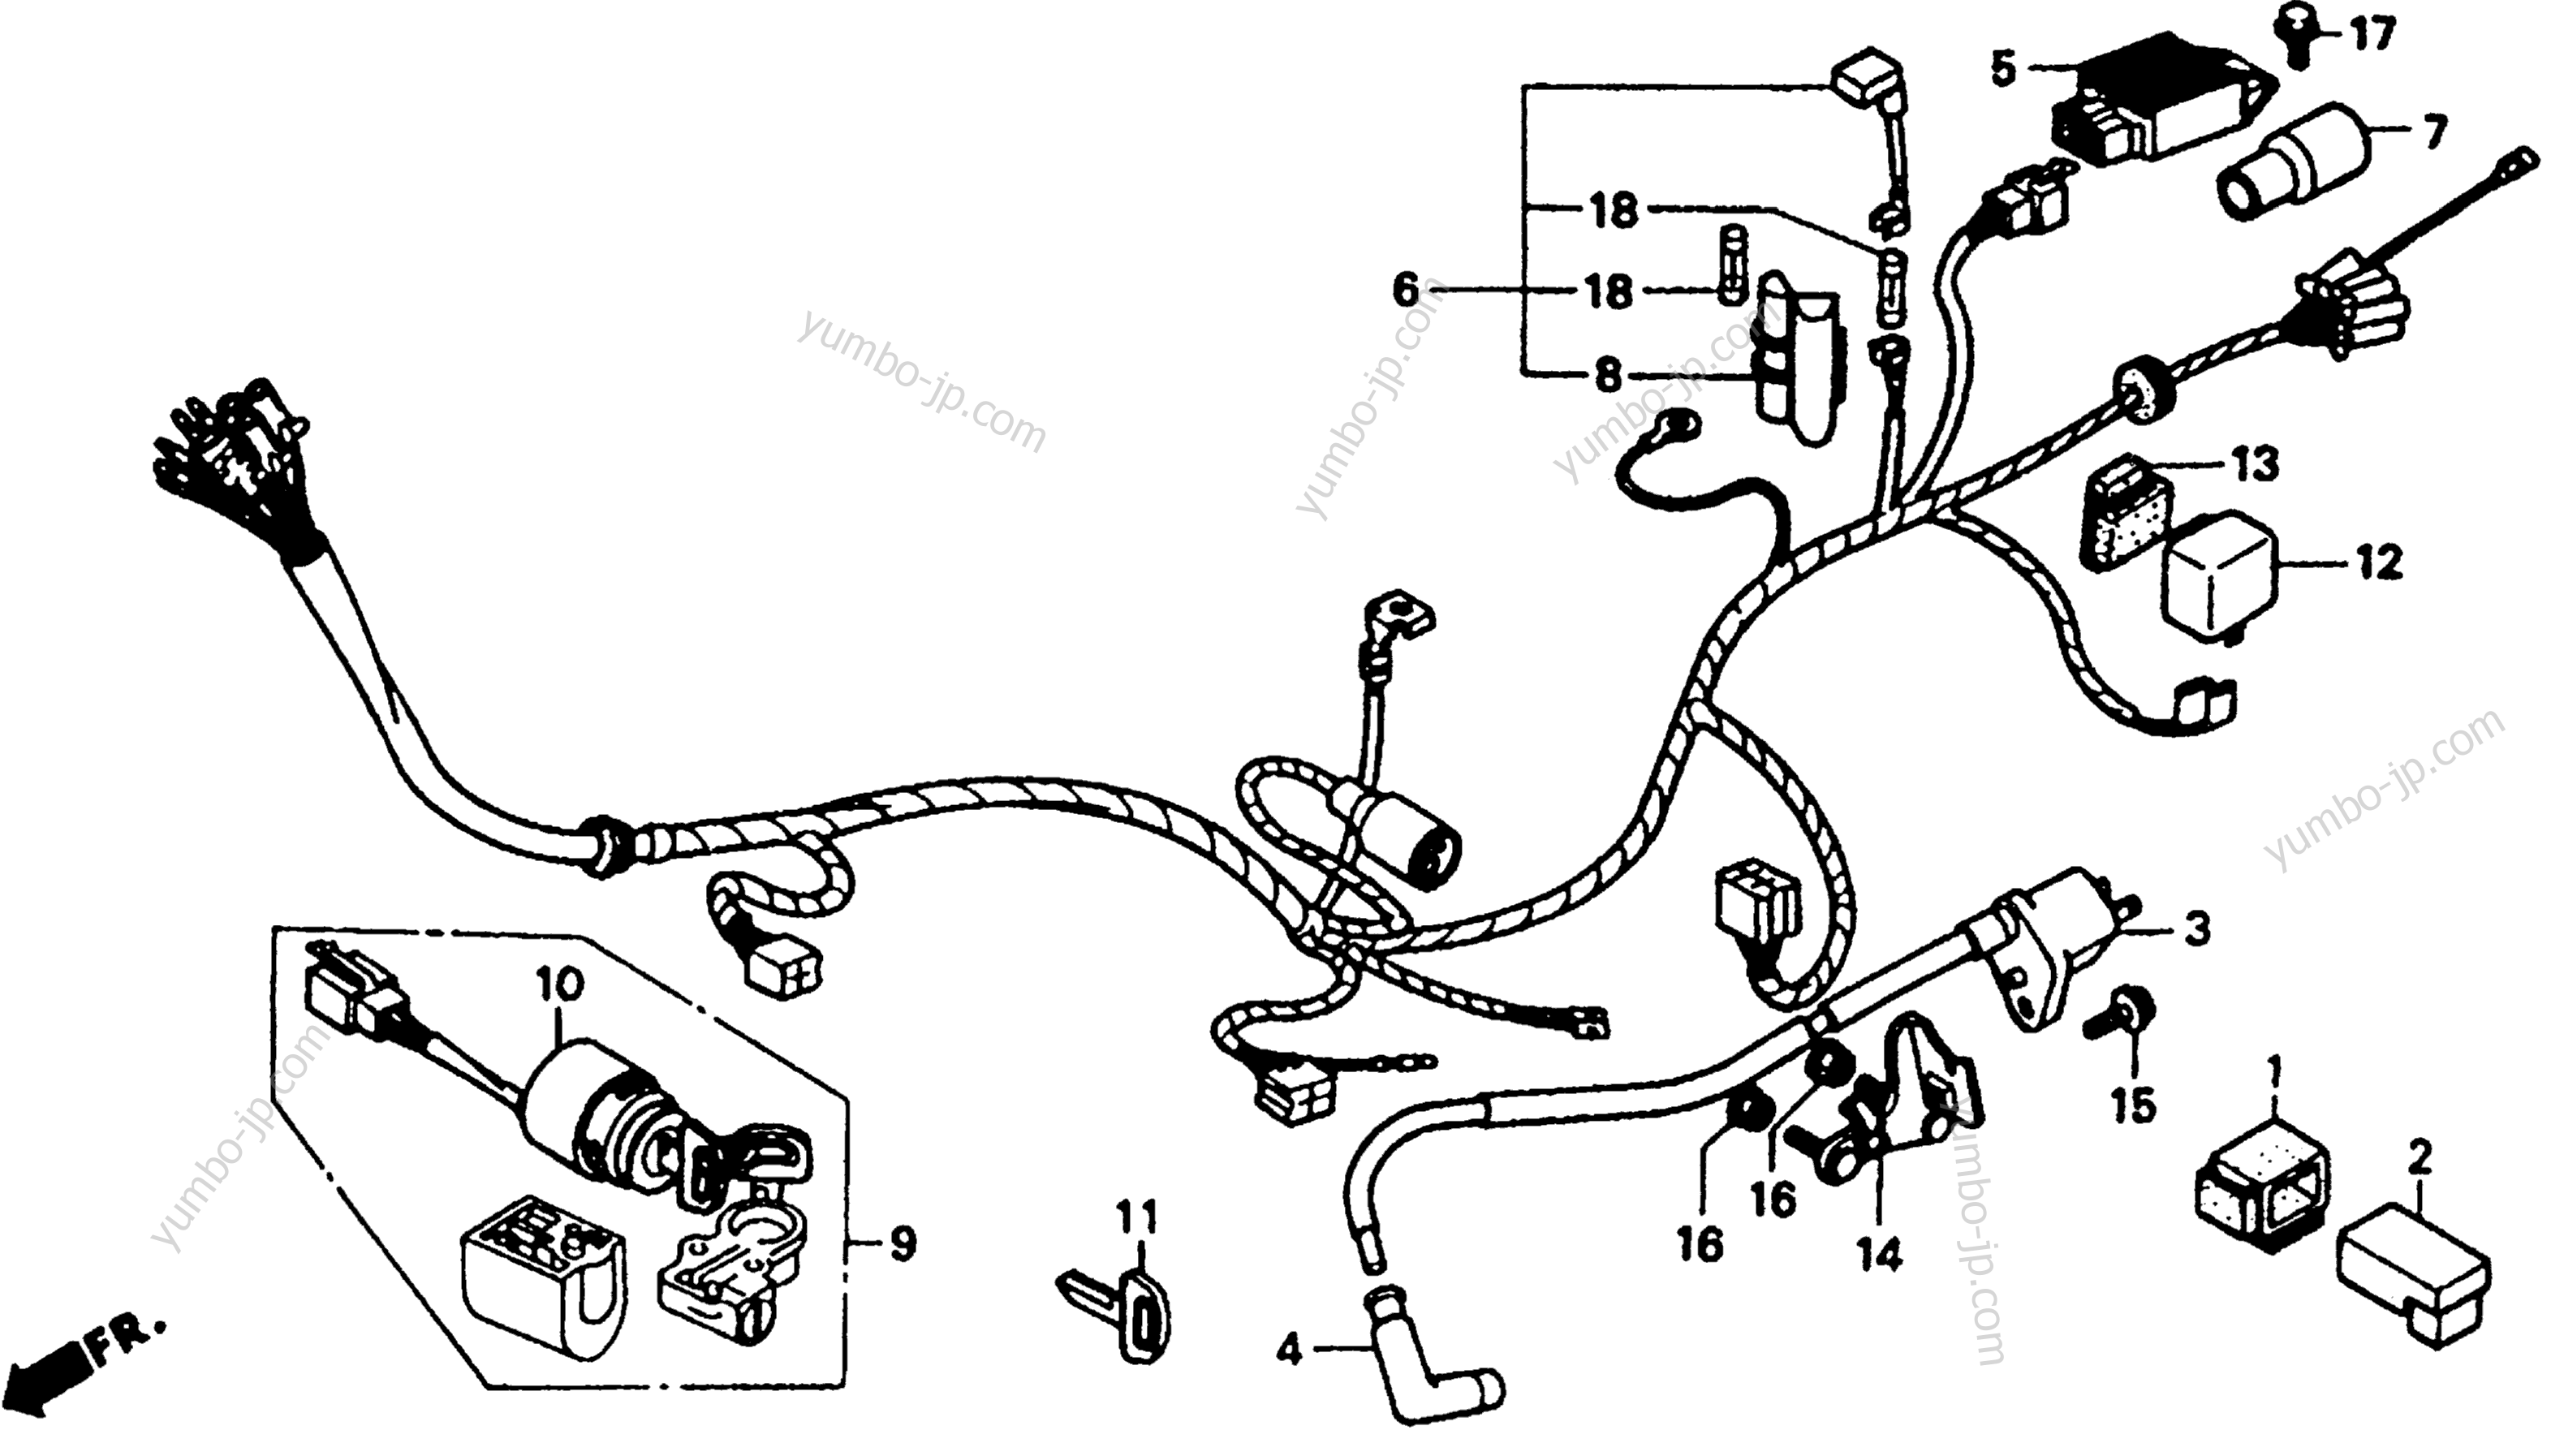 WIRE HARNESS for motorcycles HONDA CT70 A 1992 year